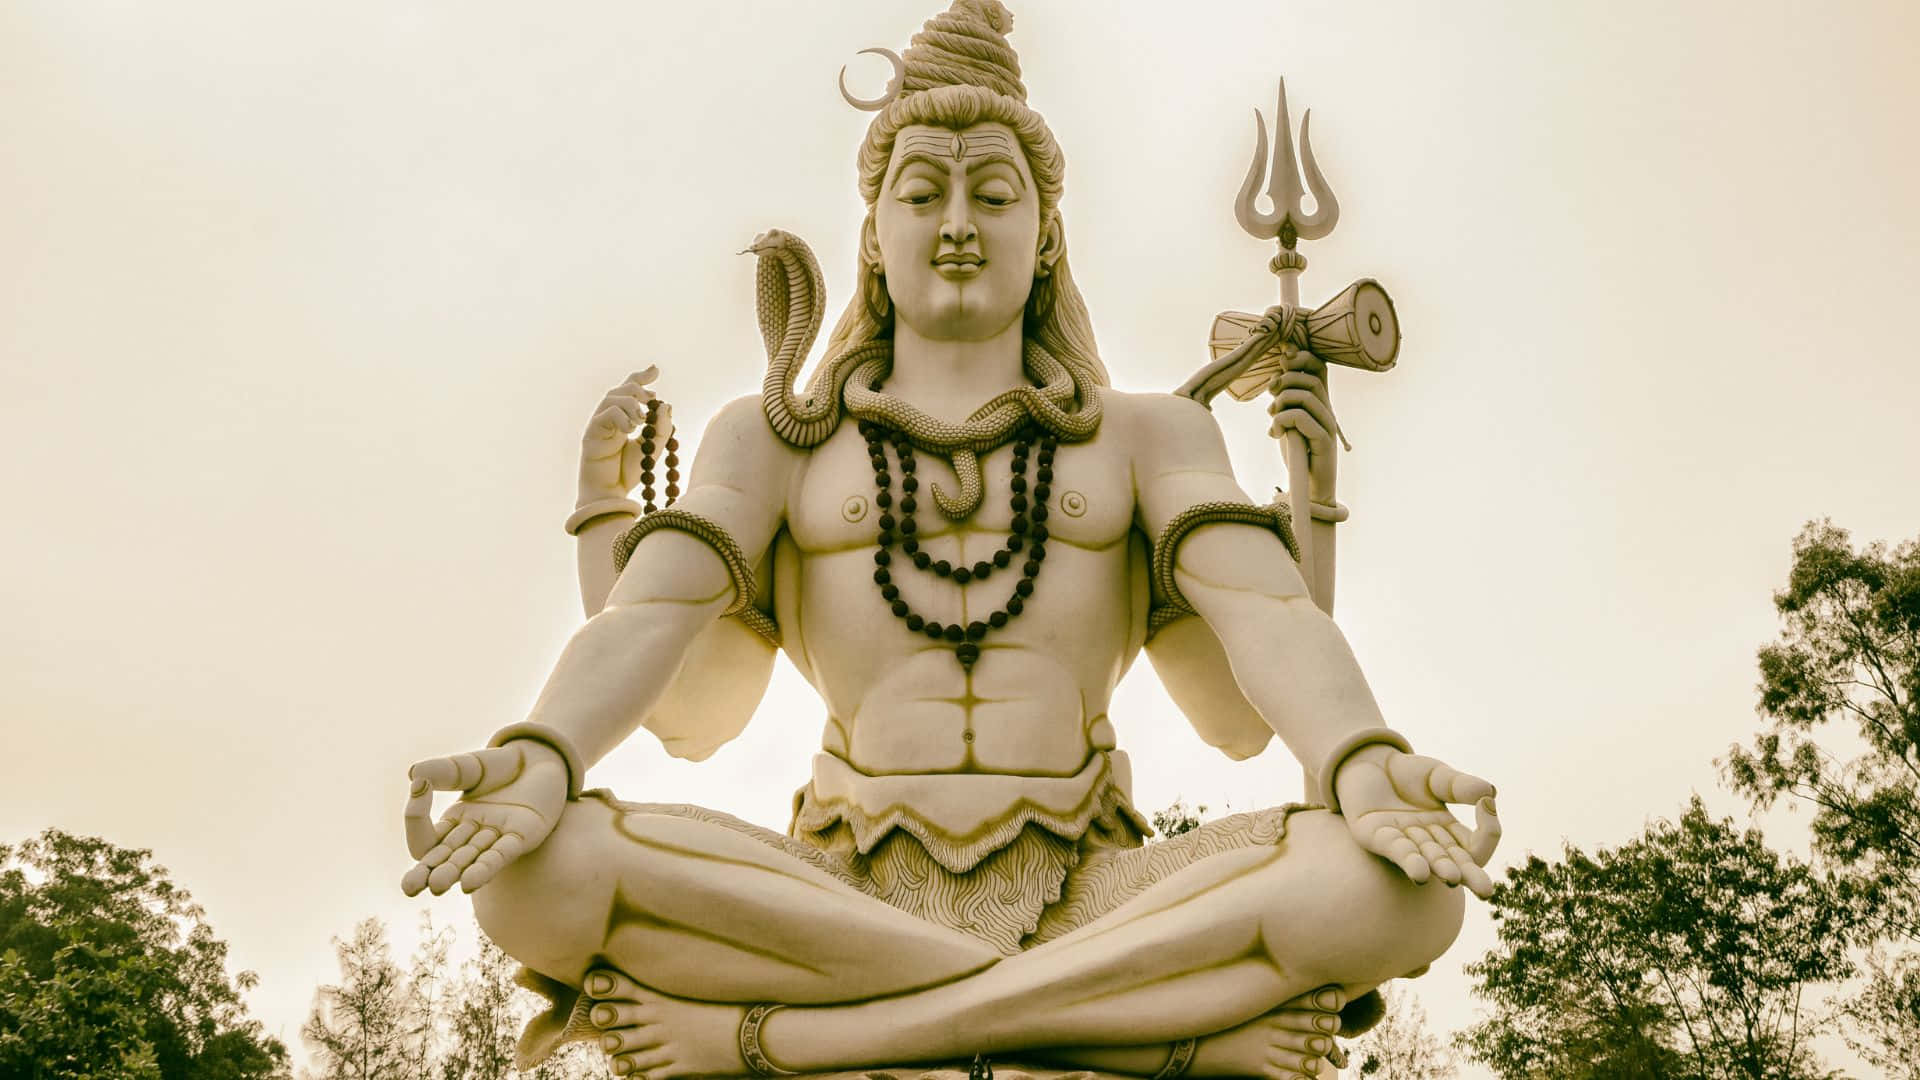 “Shiva - The Supreme Being of Hinduism”